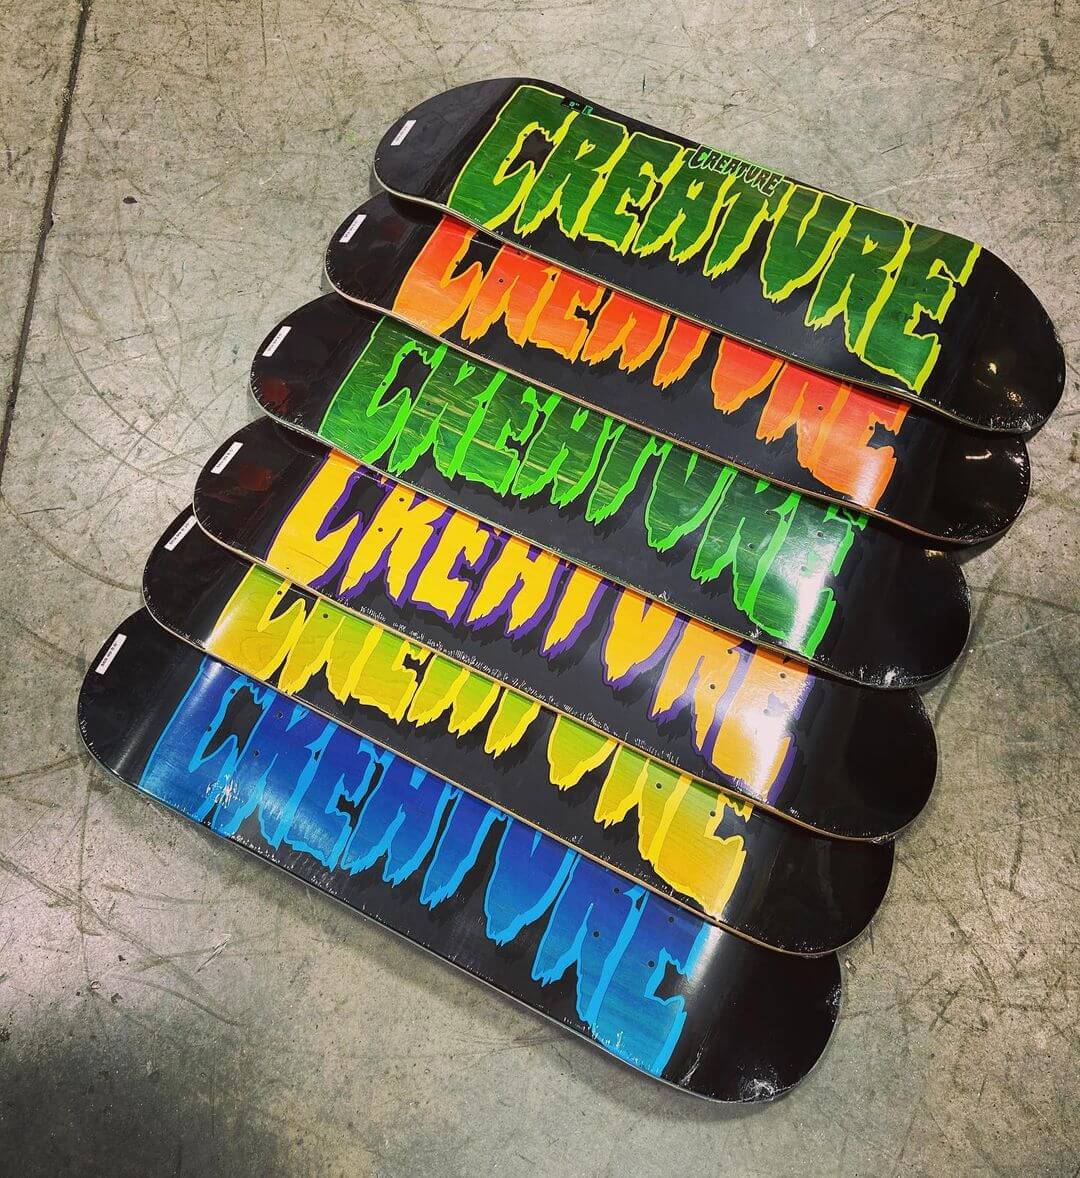 Creature skate decks  at Backwoods Snowboards and Skateboards in Auburn Maine